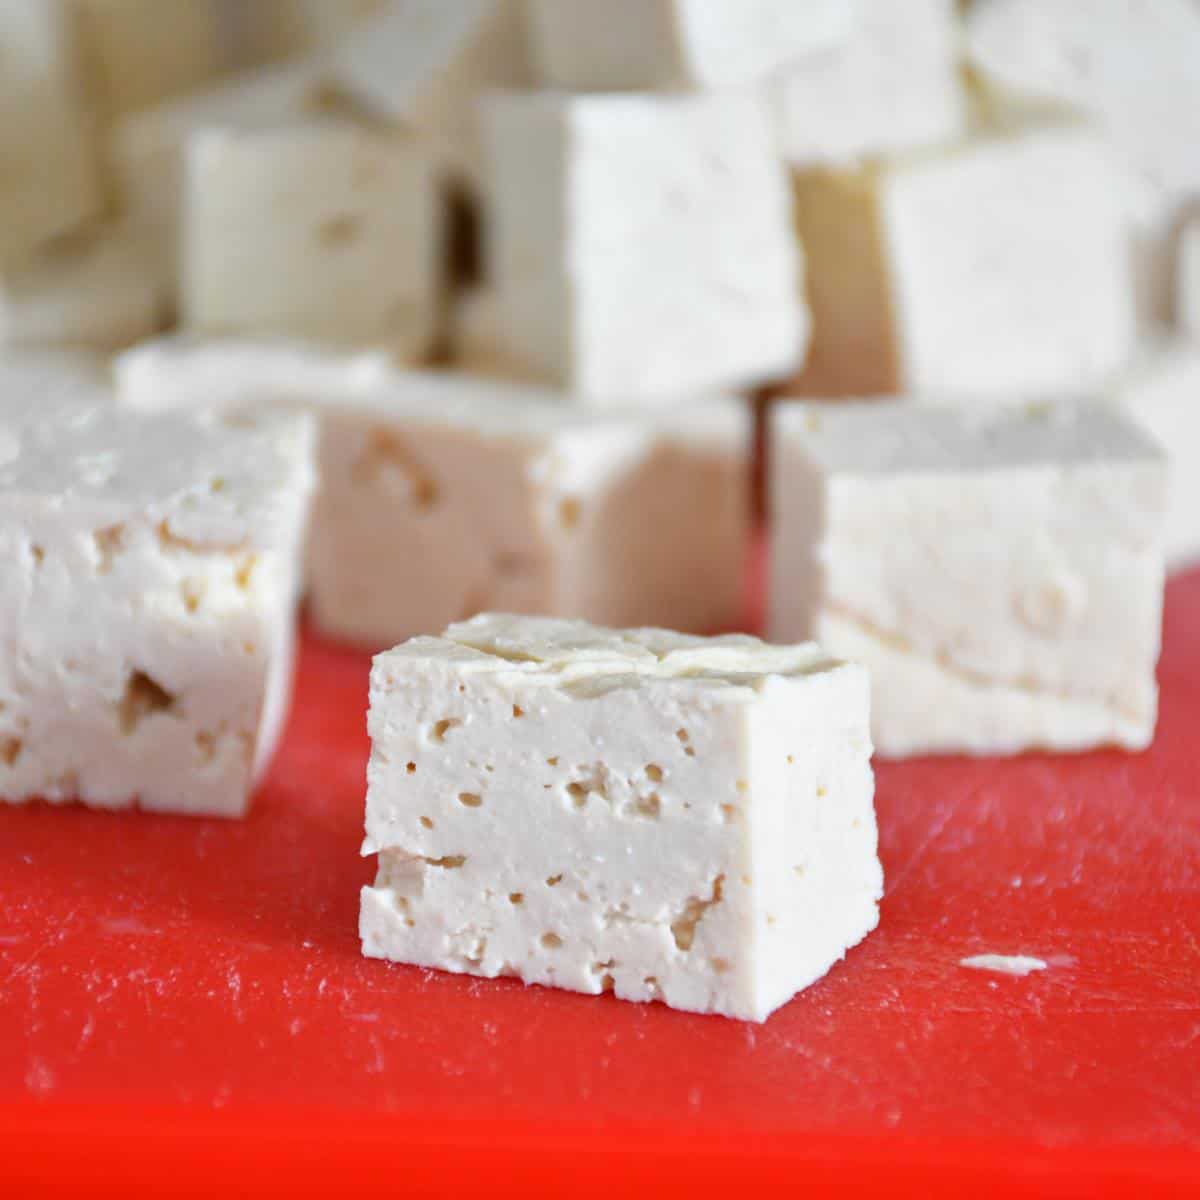 Plain extra-firm tofu diced to make baked tofu in the oven.